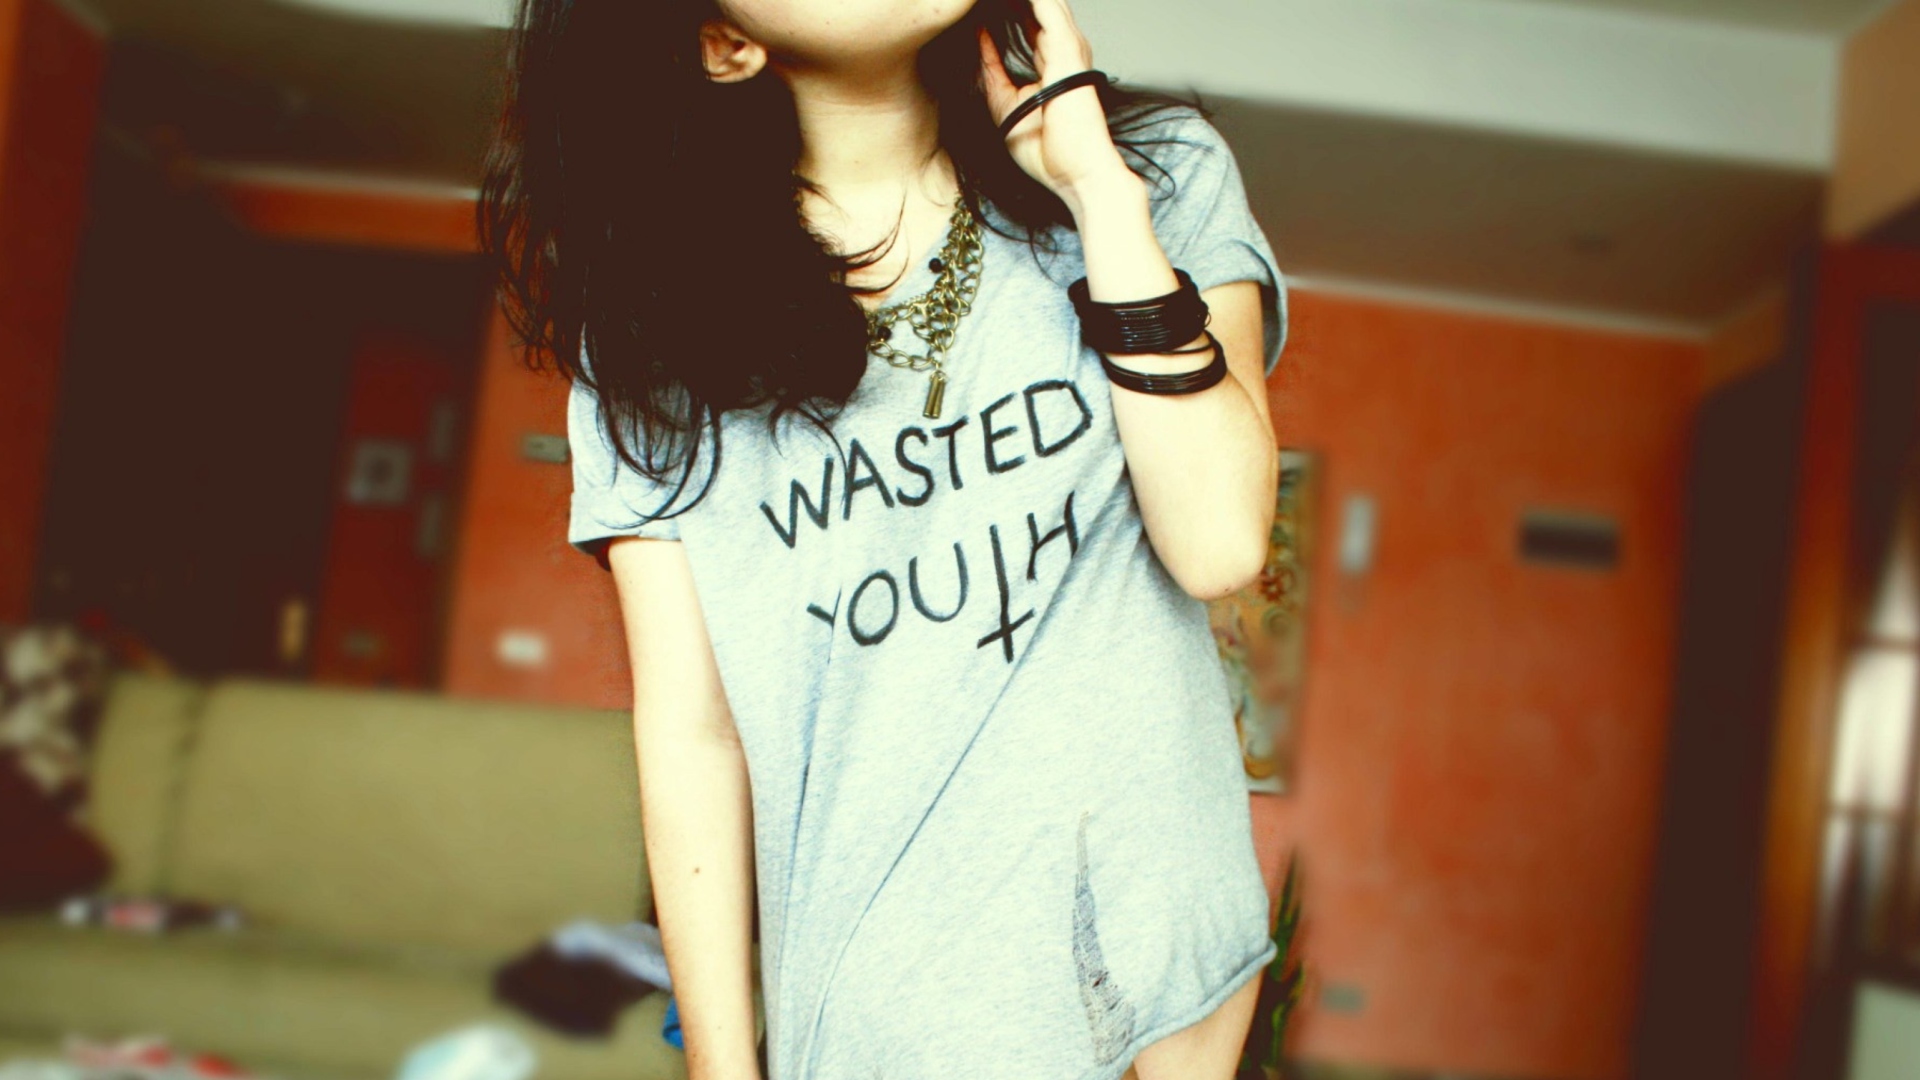 Wasted Youth T-Shirt wallpaper 1920x1080